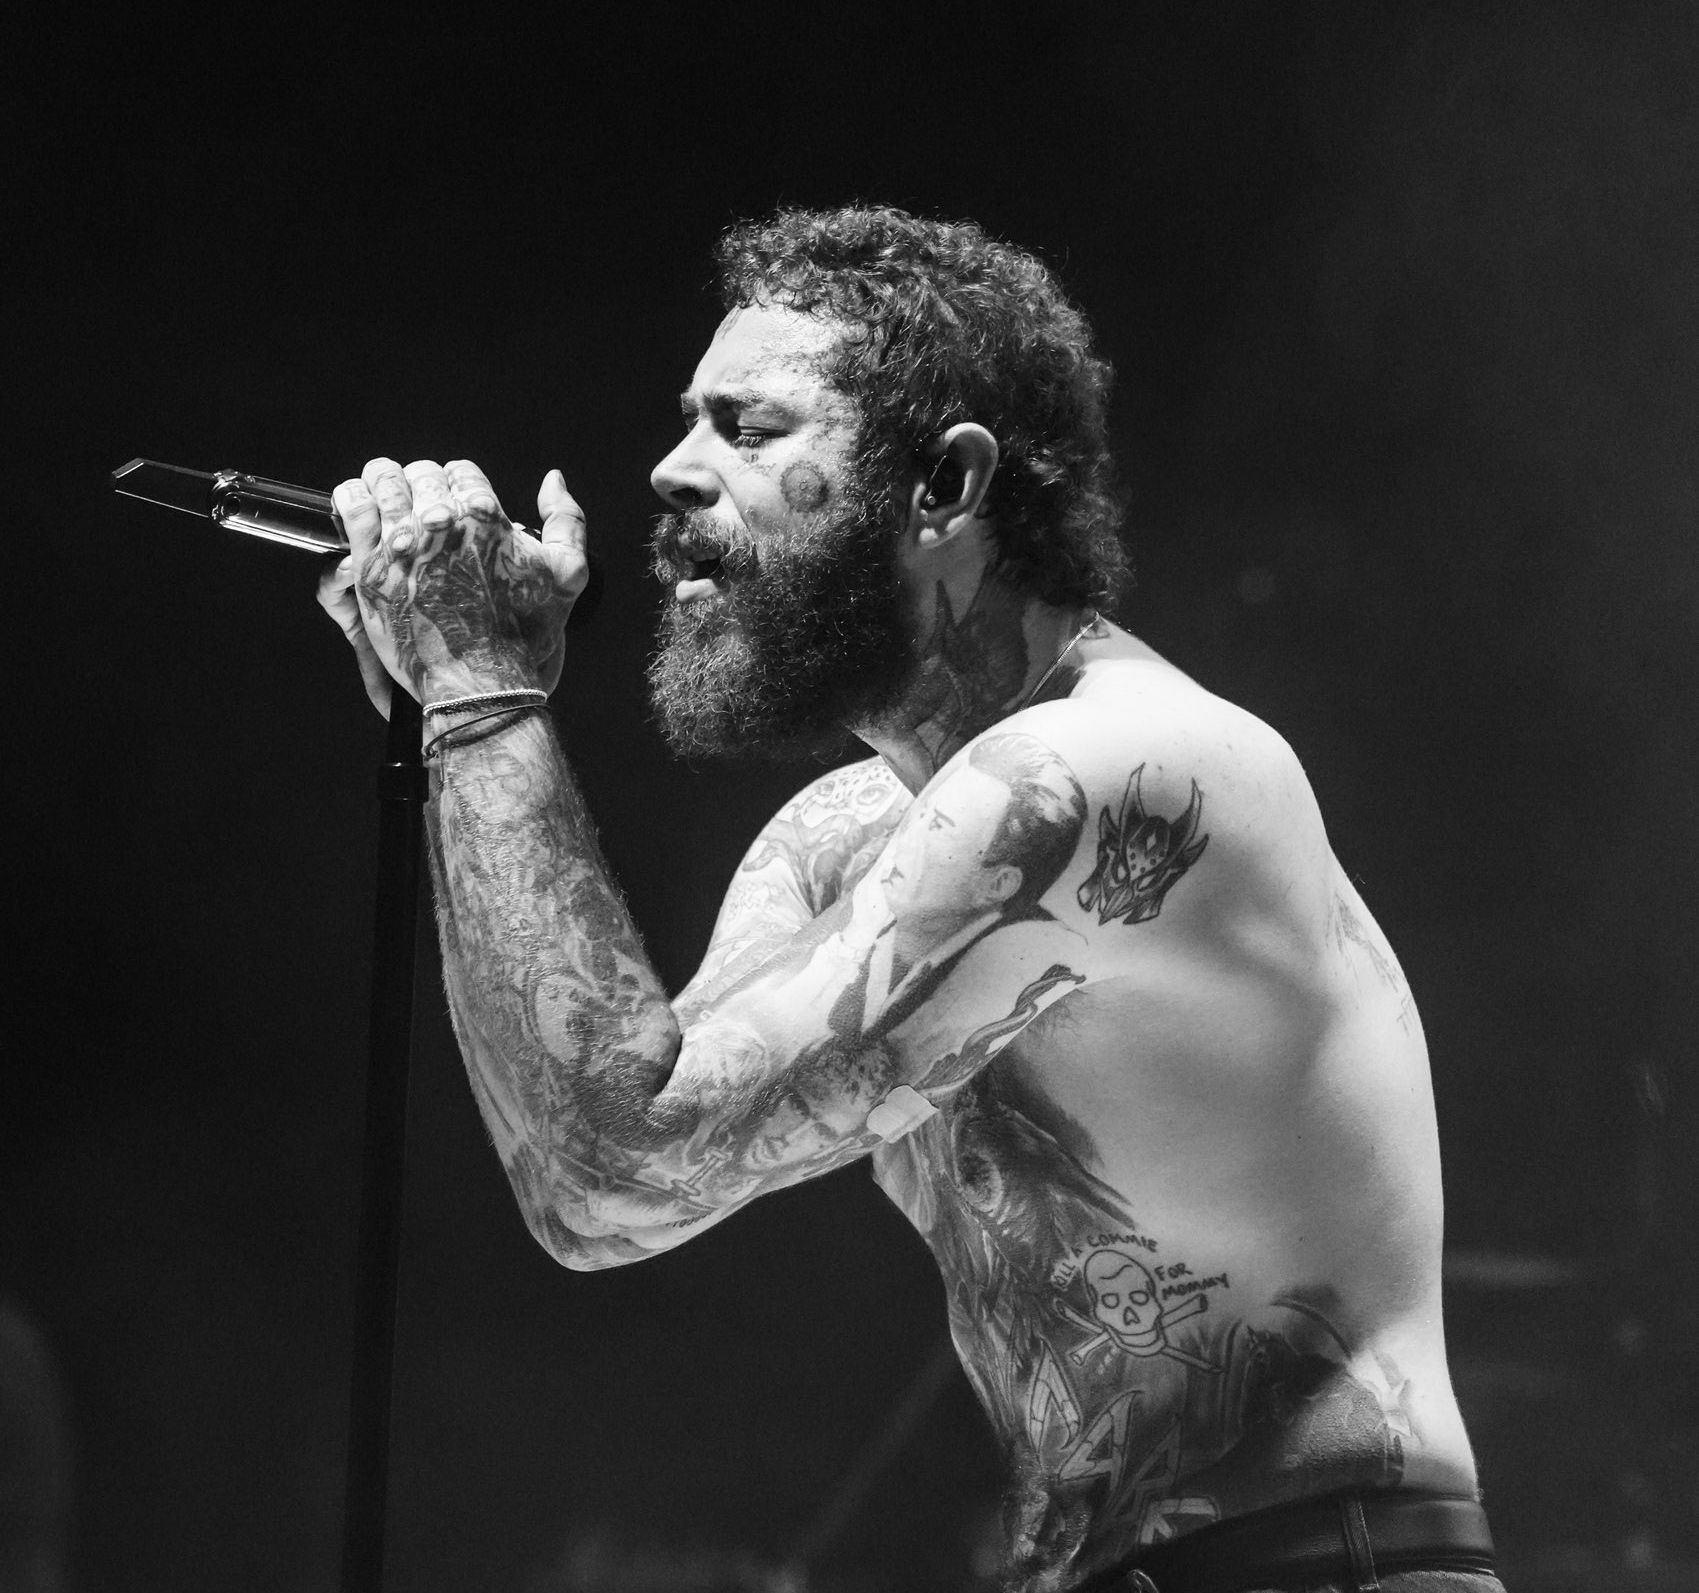 Noah Kahan Joins Post Malone For Live Performance of ‘Dial Drunk’ in Boston